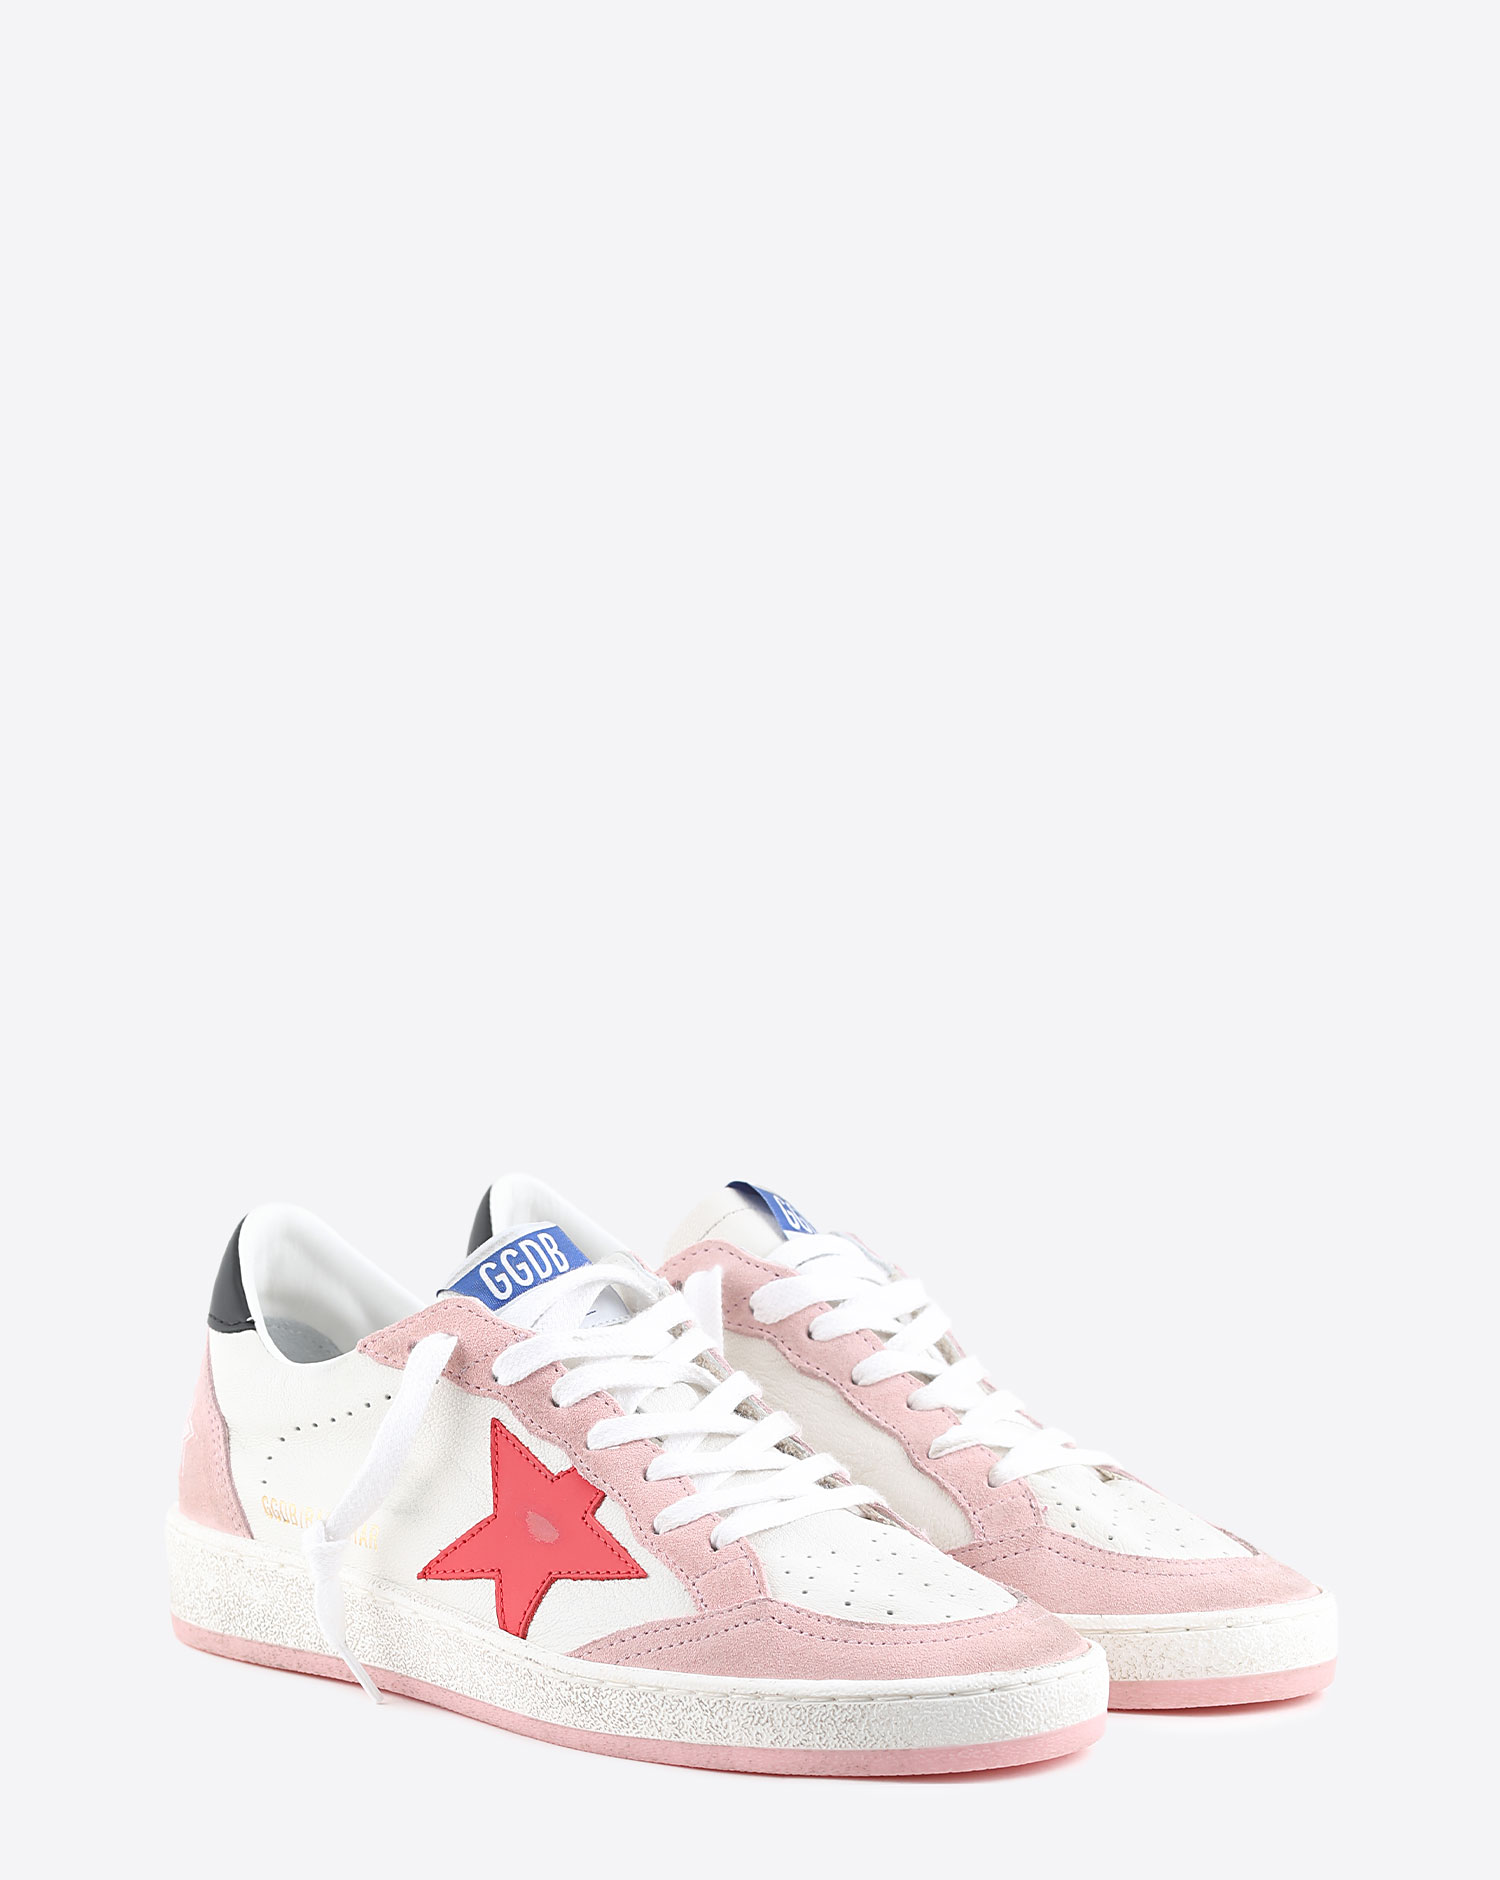 Sneakers Golden Goose Ball Star White Pink Red Black 10880. Face.